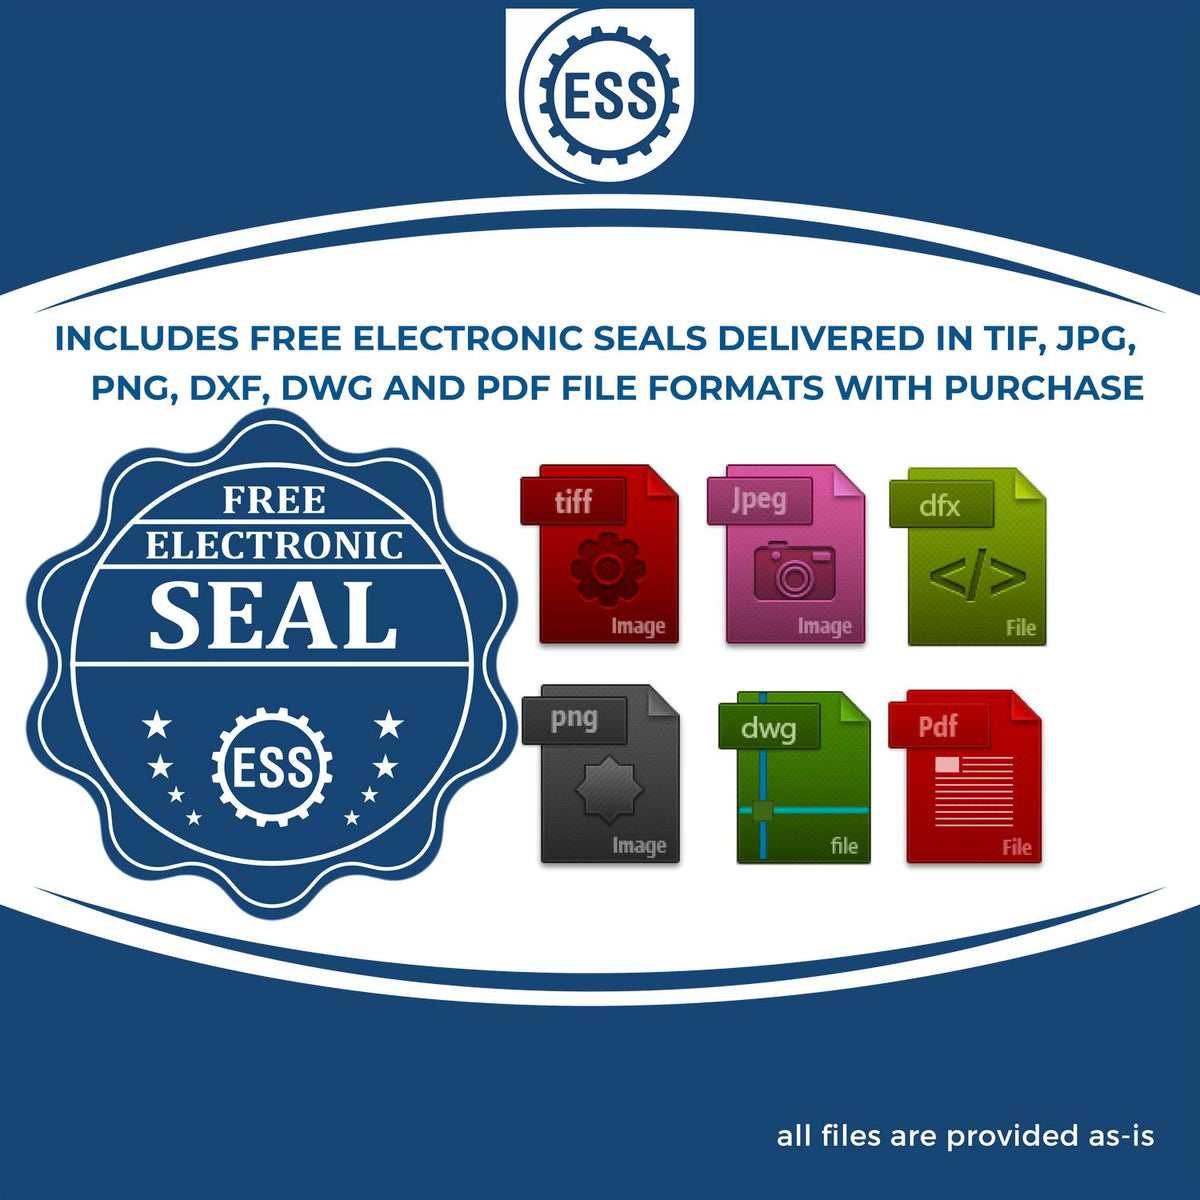 An infographic for the free electronic seal for the Gift Hawaii Engineer Seal illustrating the different file type icons such as DXF, DWG, TIF, JPG and PNG.